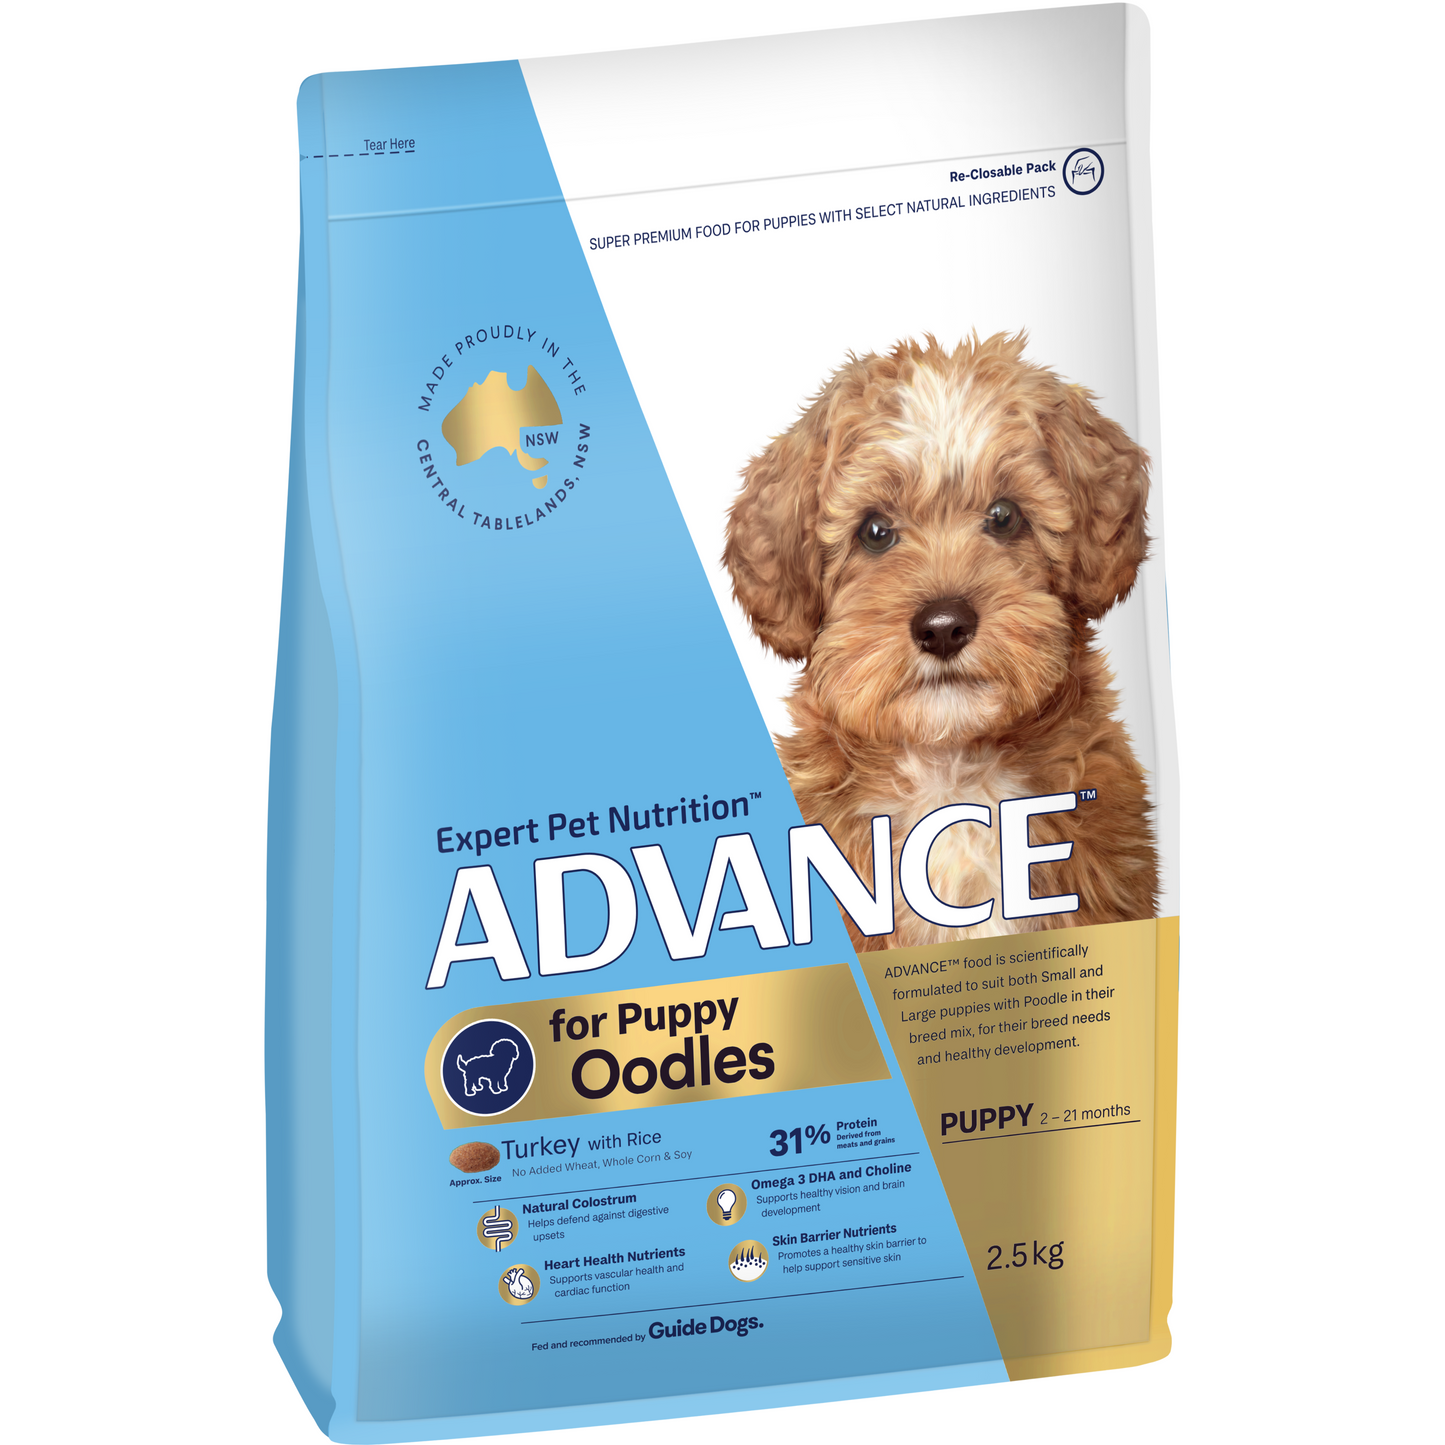 ADVANCE™ Oodles Puppy Turkey with Rice